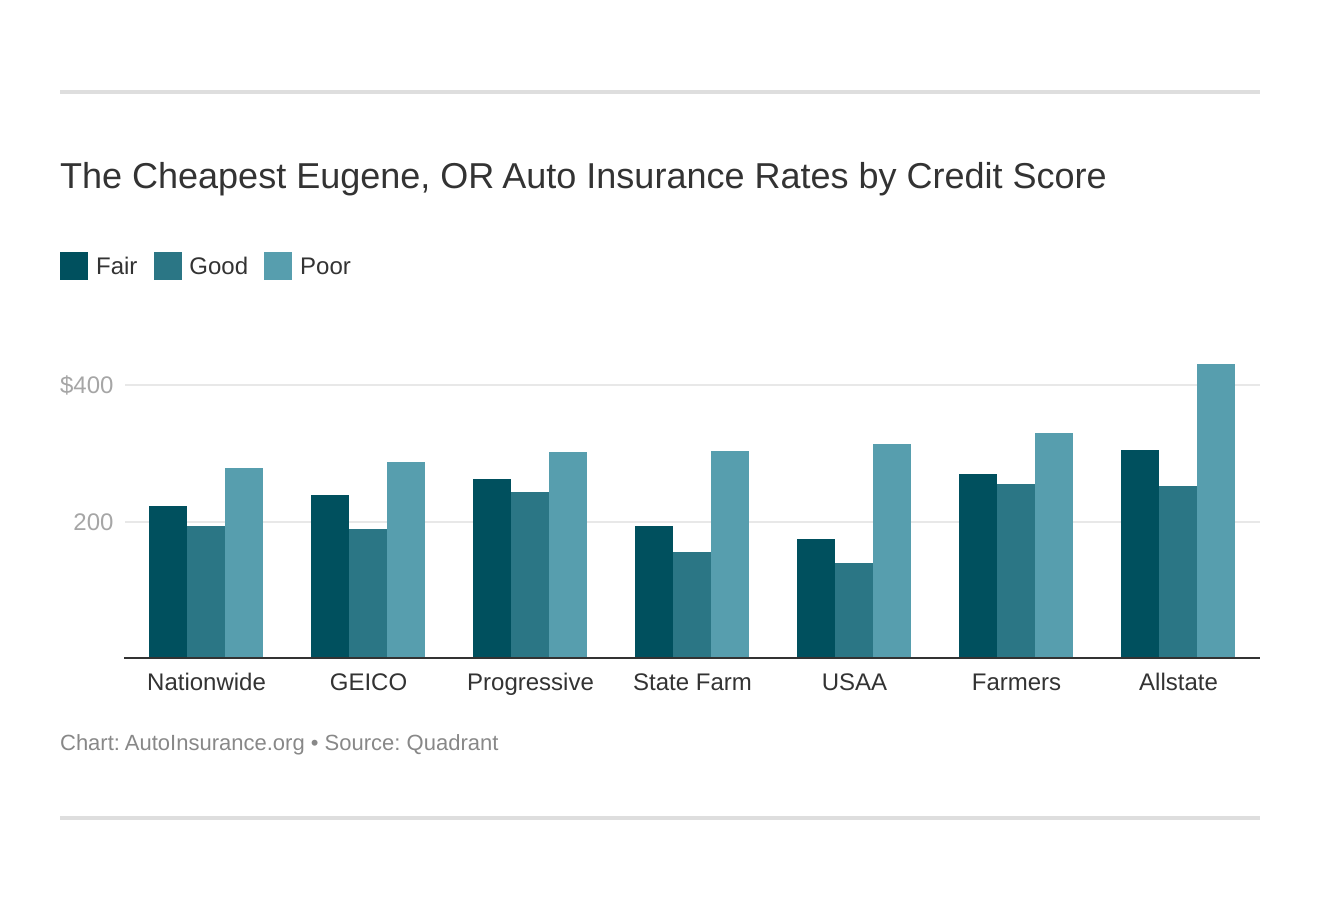 The Cheapest Eugene, OR Auto Insurance Rates by Credit Score